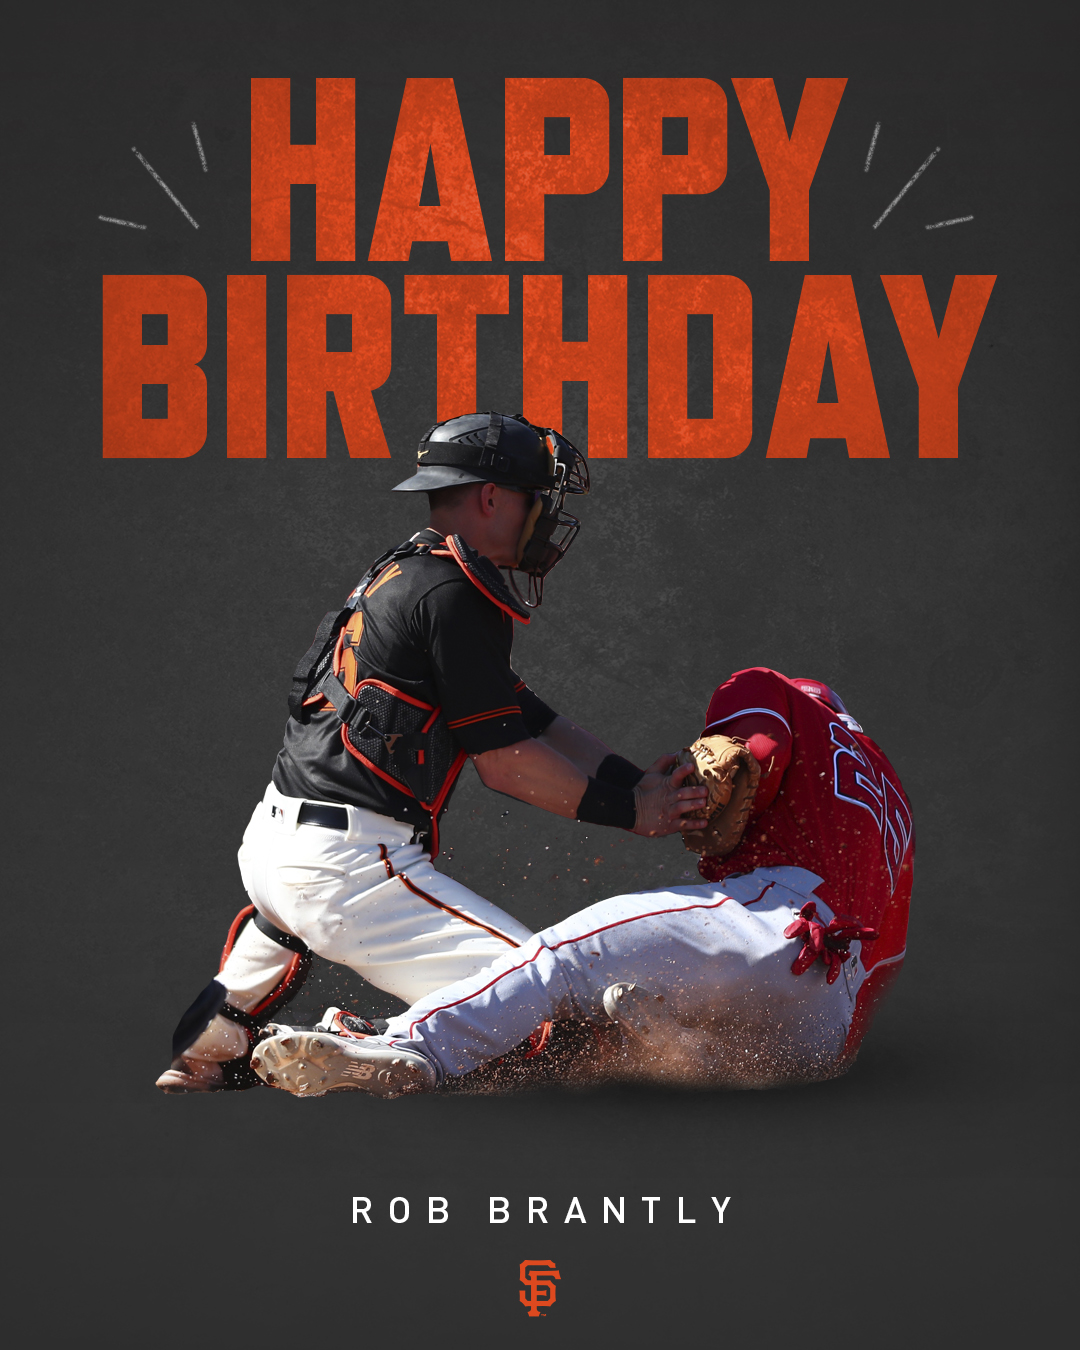 Also wishing a very Happy Birthday to Catcher Rob Brantly!  